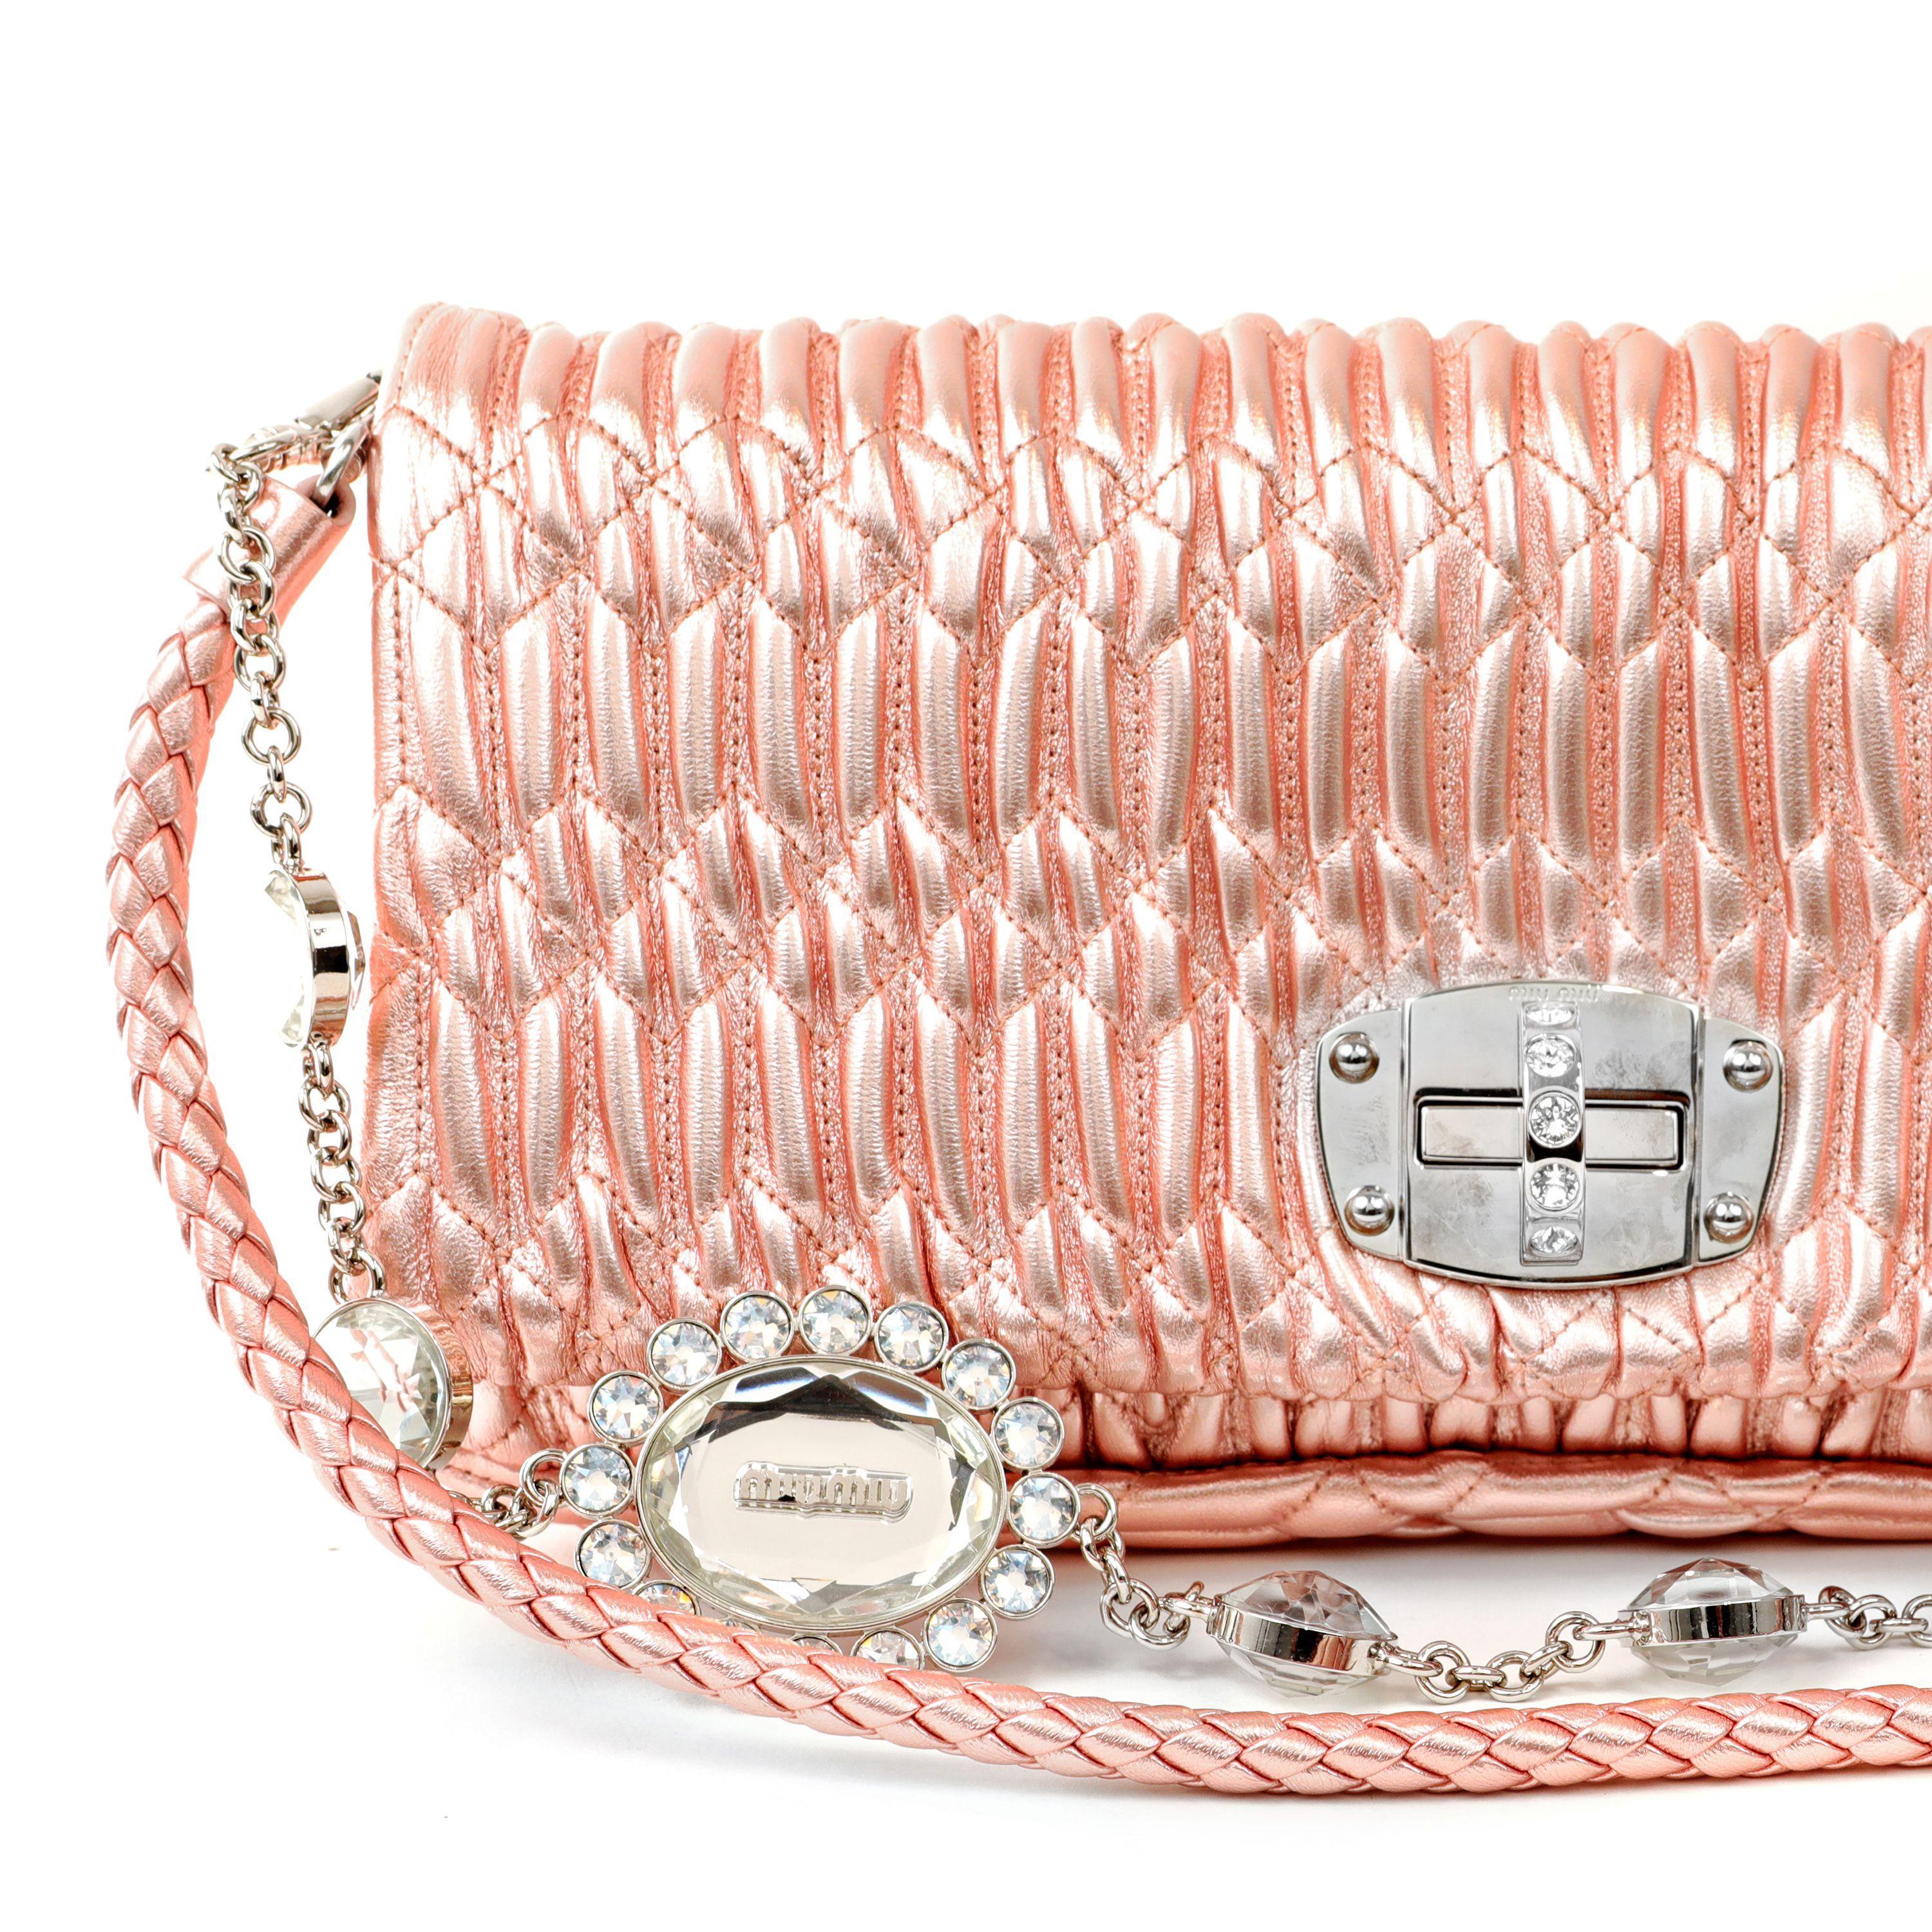 This authentic Miu Miu Metallic Pink Crystal Cloquè Small Bag is in pristine condition.  The iconic design features shimmery pink raised quilted Nappa leather with silver and crystal turn lock closure.  May be carried by the detachable leather strap